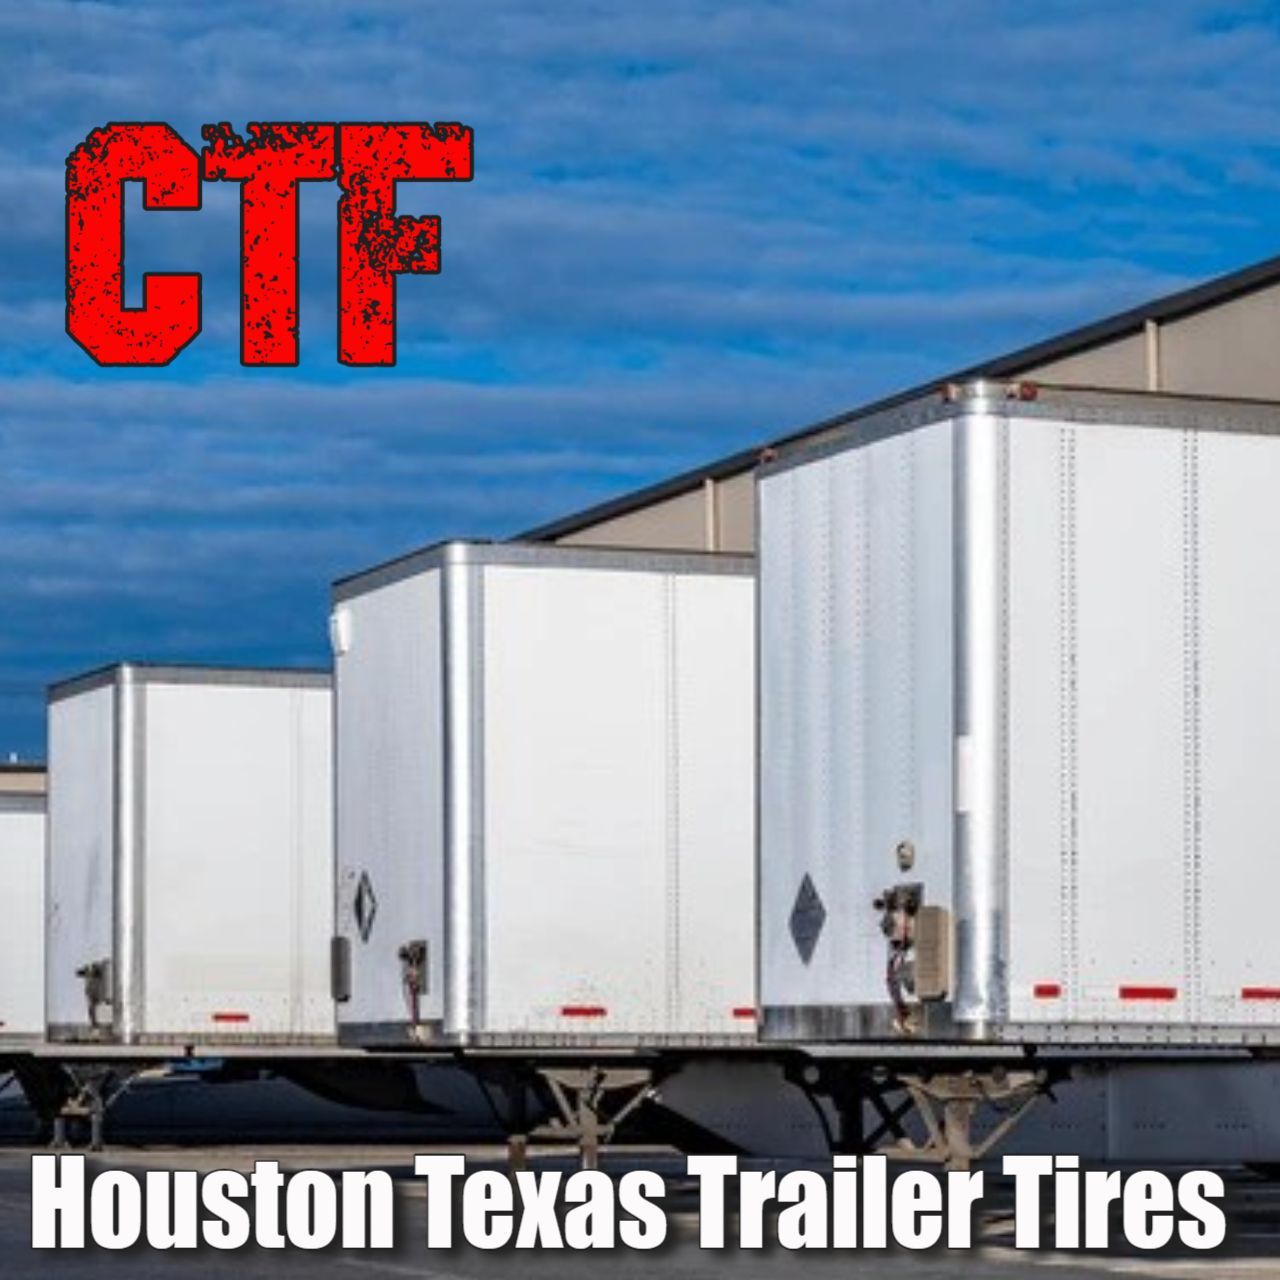 a houston texas trailer tires ad with a row of trailers